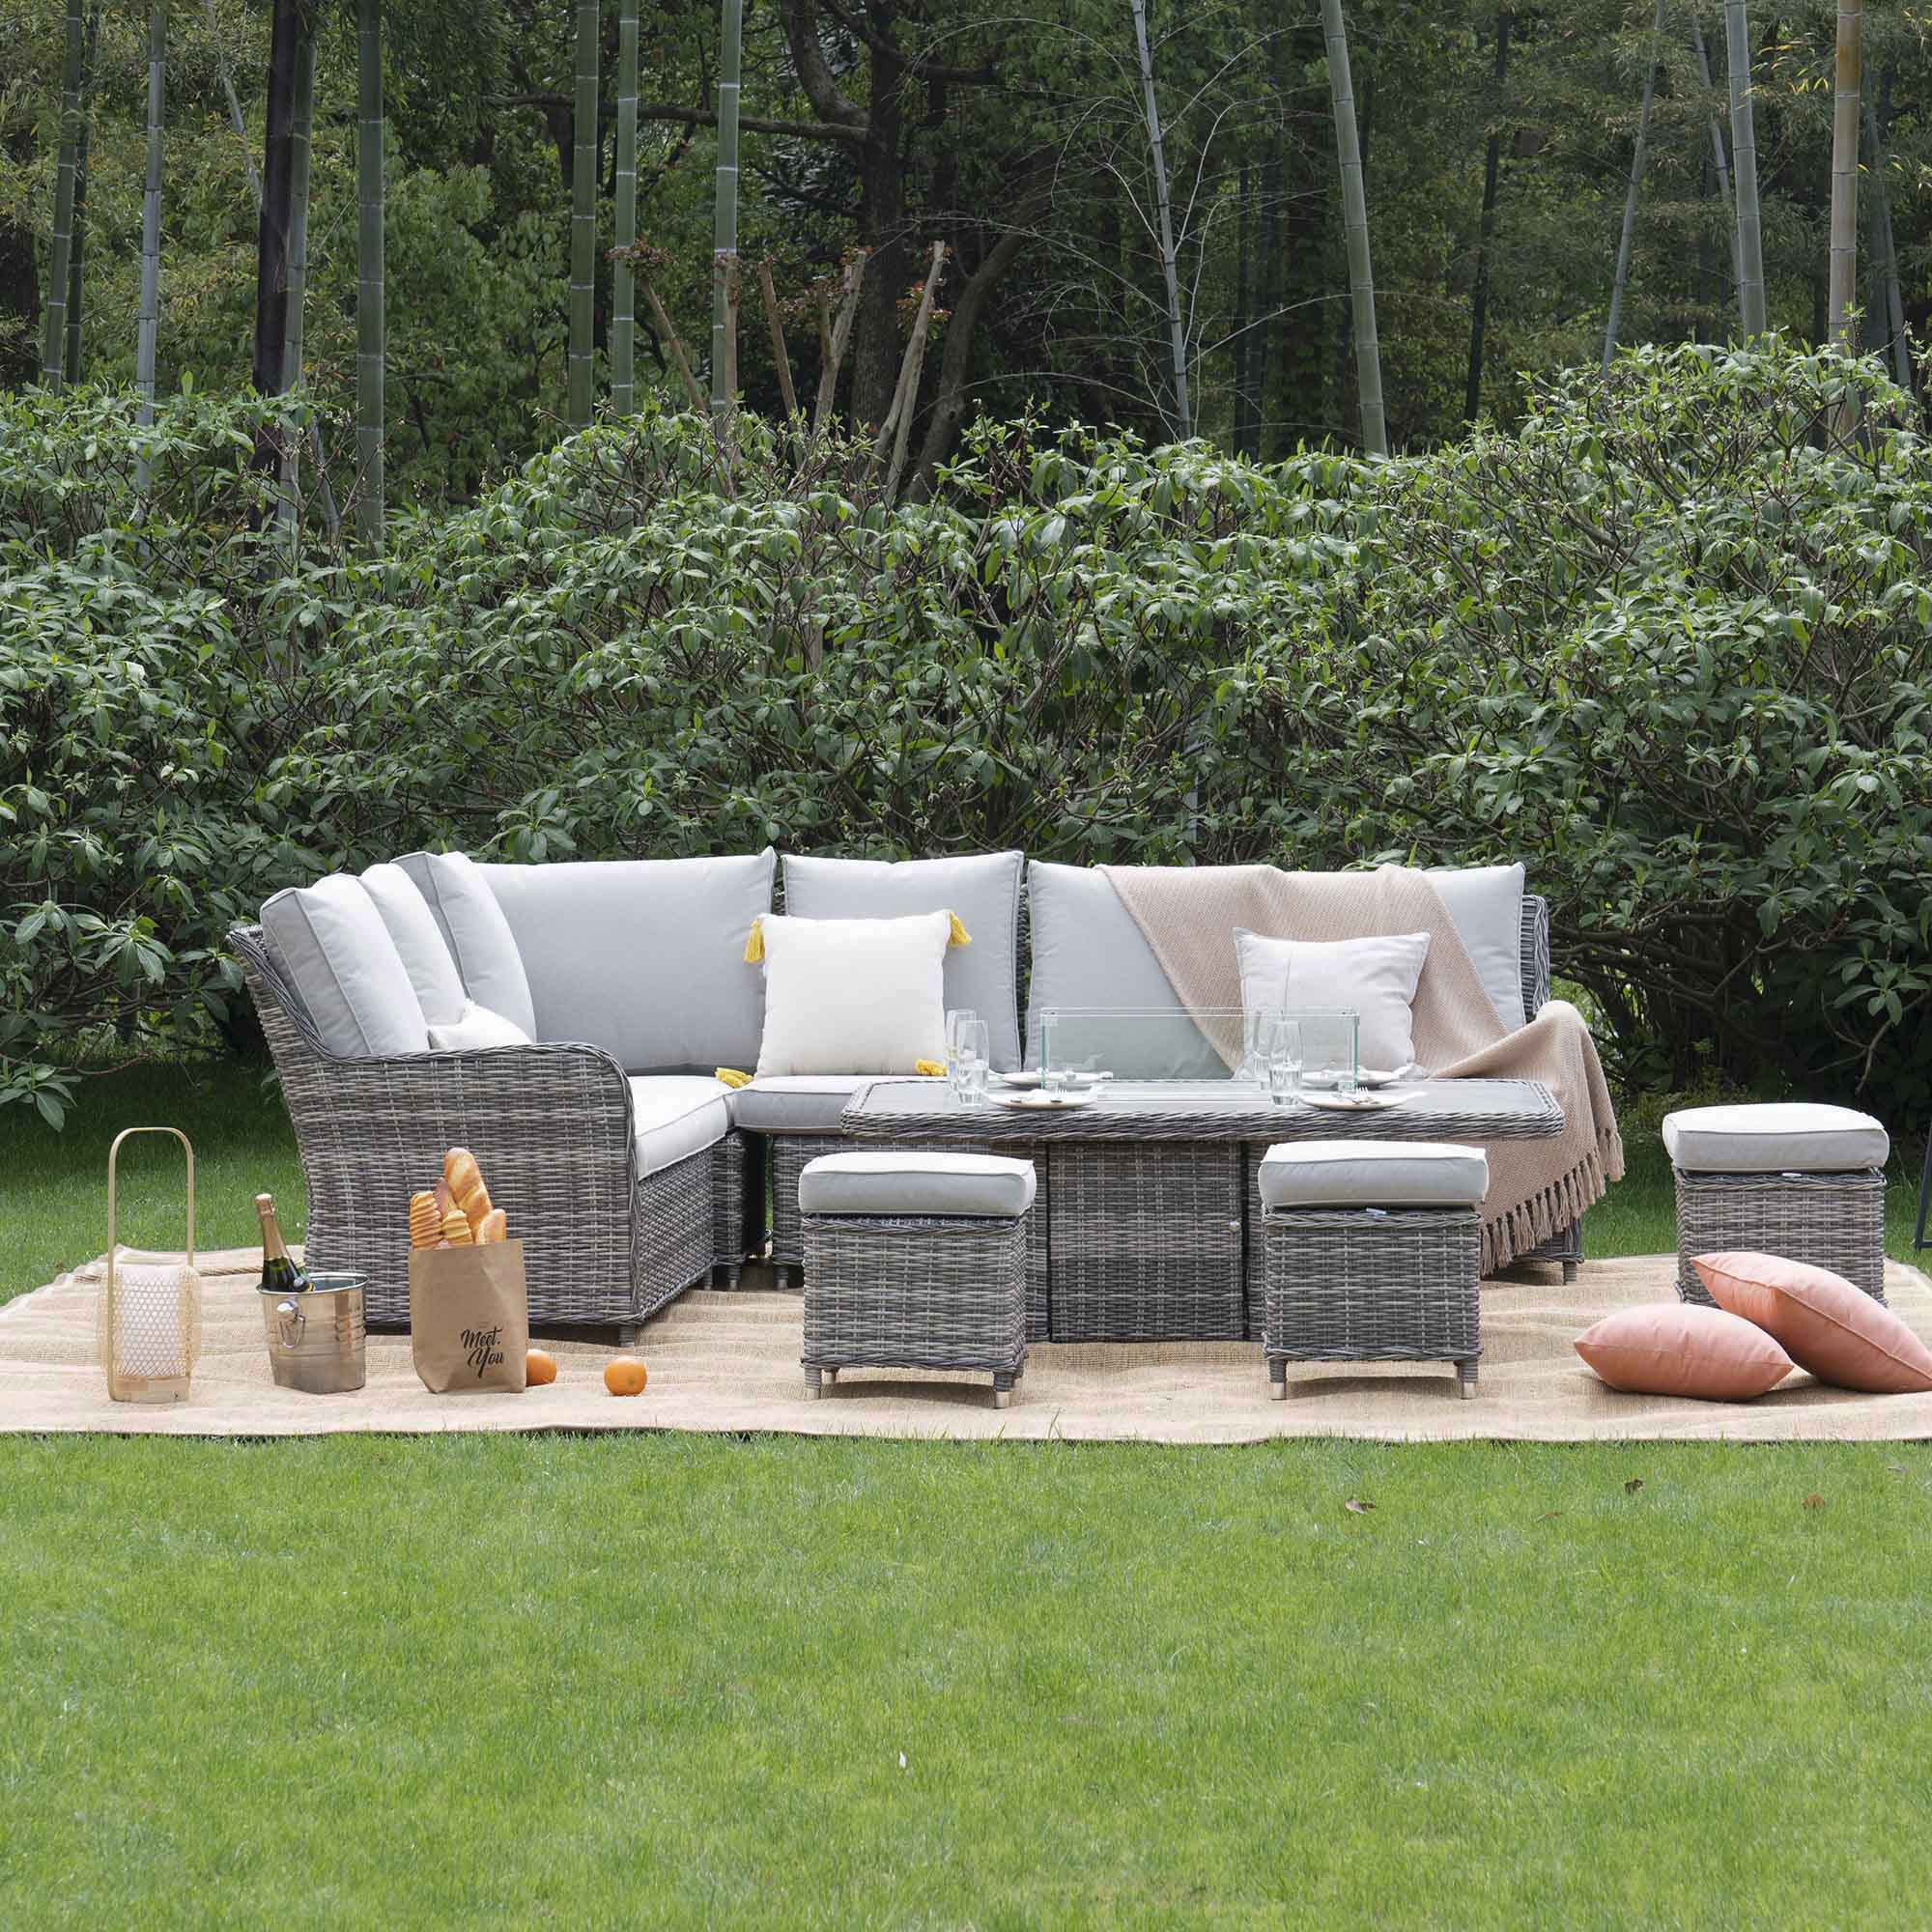 Hampshire Large Corner Round Wicker Rattan Casual Dining Set with Rising Firepit Table, Light Grey